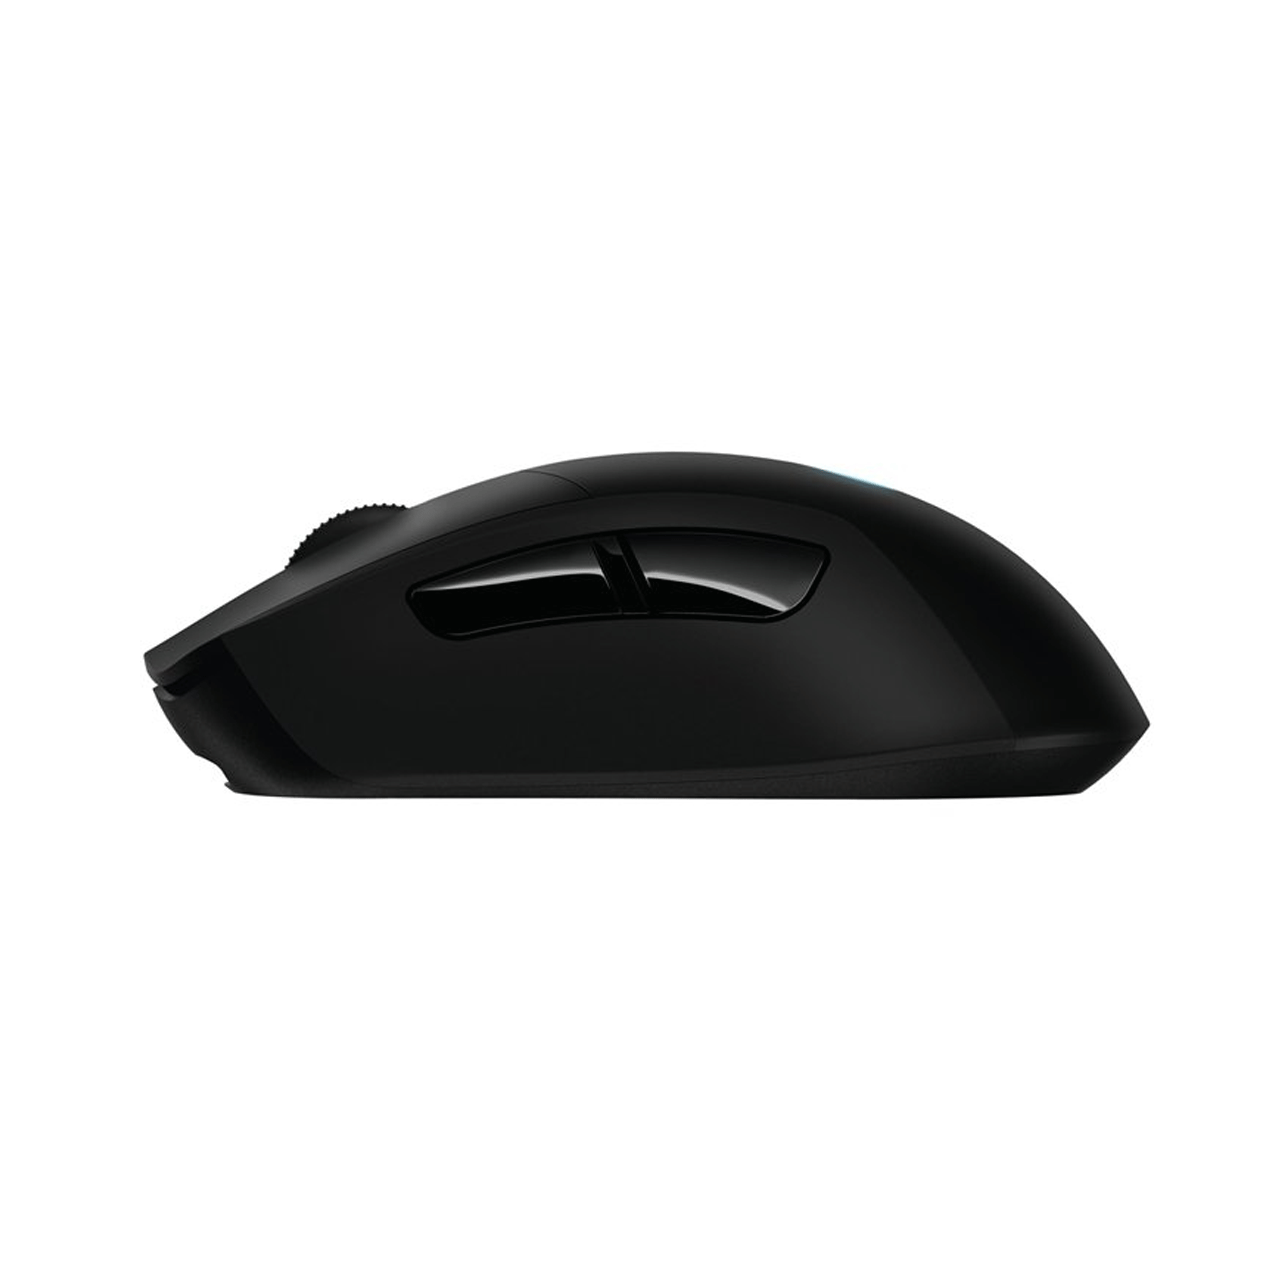 Logitech----G703-Wireless-Gaming-Mouse